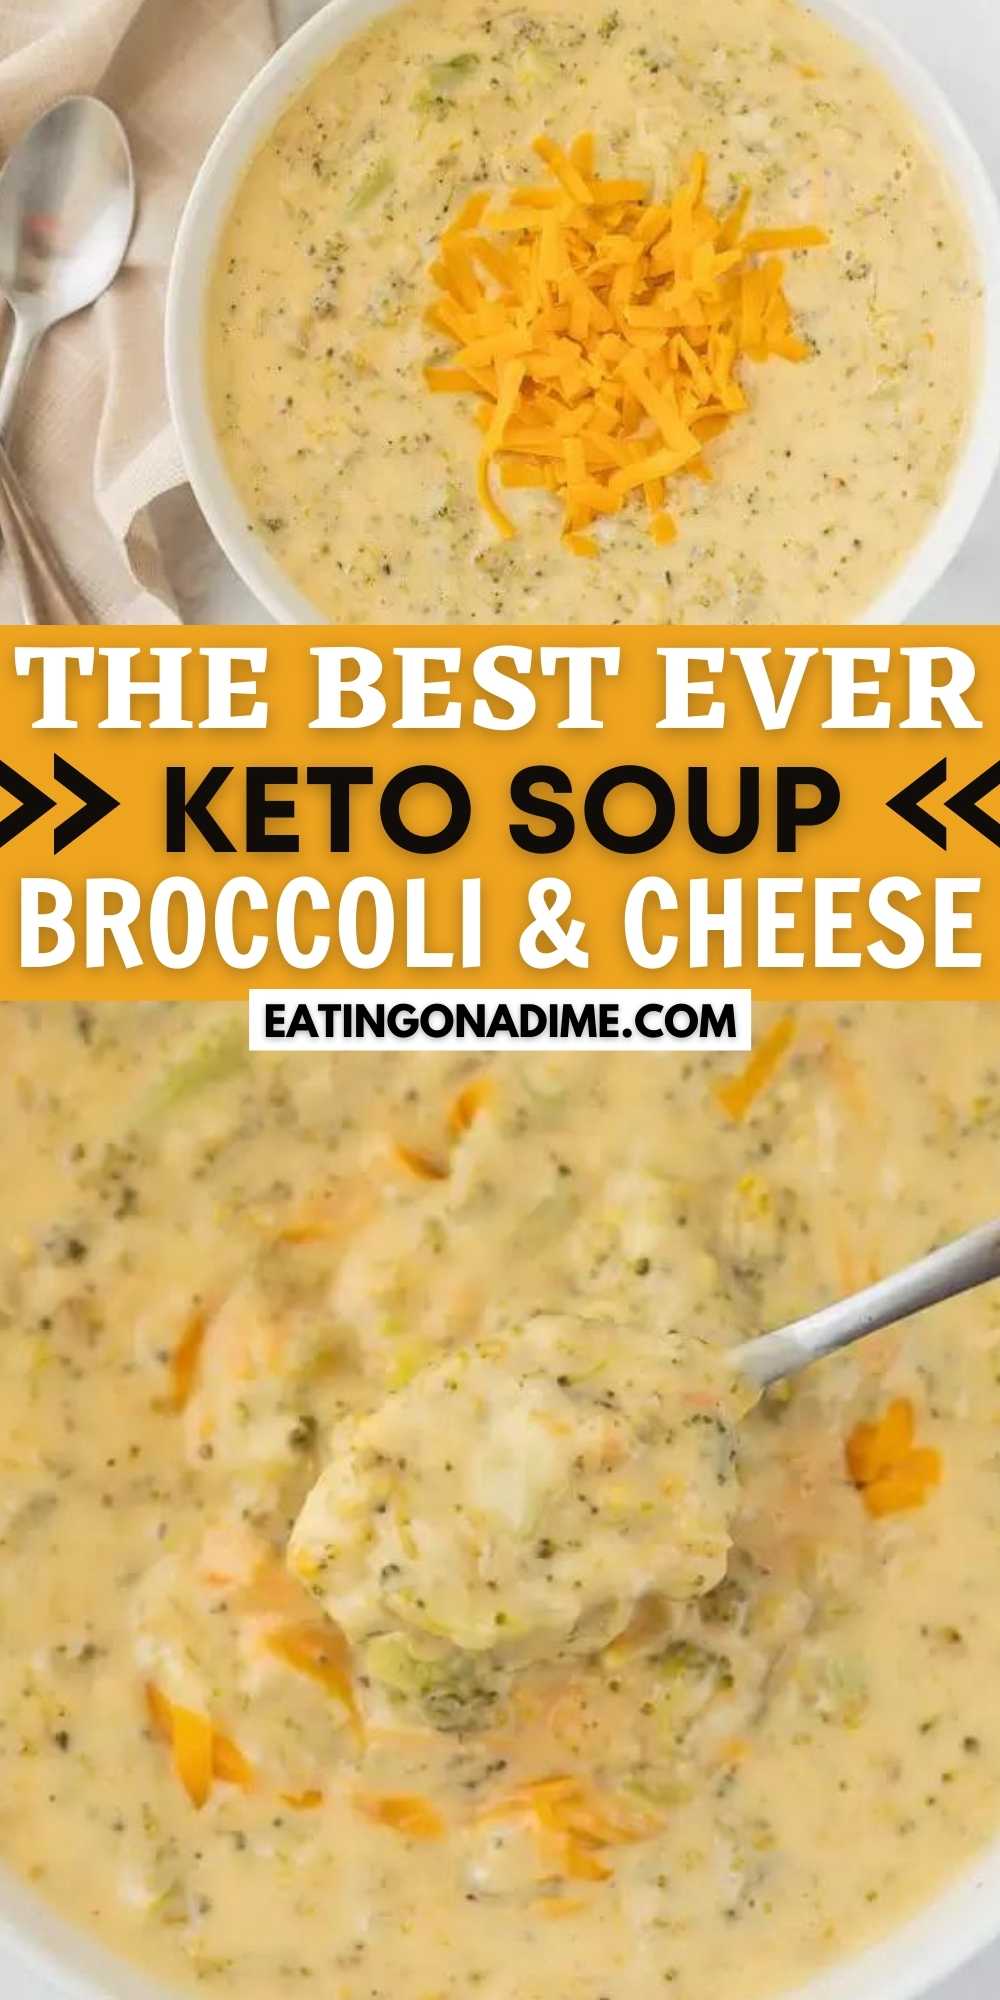 Enjoy Keto Broccoli Cheese Soup Recipe without any guilt. Keto Broccoli Cheese soup is loaded with broccoli and cheese plus low carb! So simple and easy. Everyone loves this easy to make broccoli cheese soup that is healthy too!  #eatingonadime #souprecipes #ketorecipes #lowcarb 
